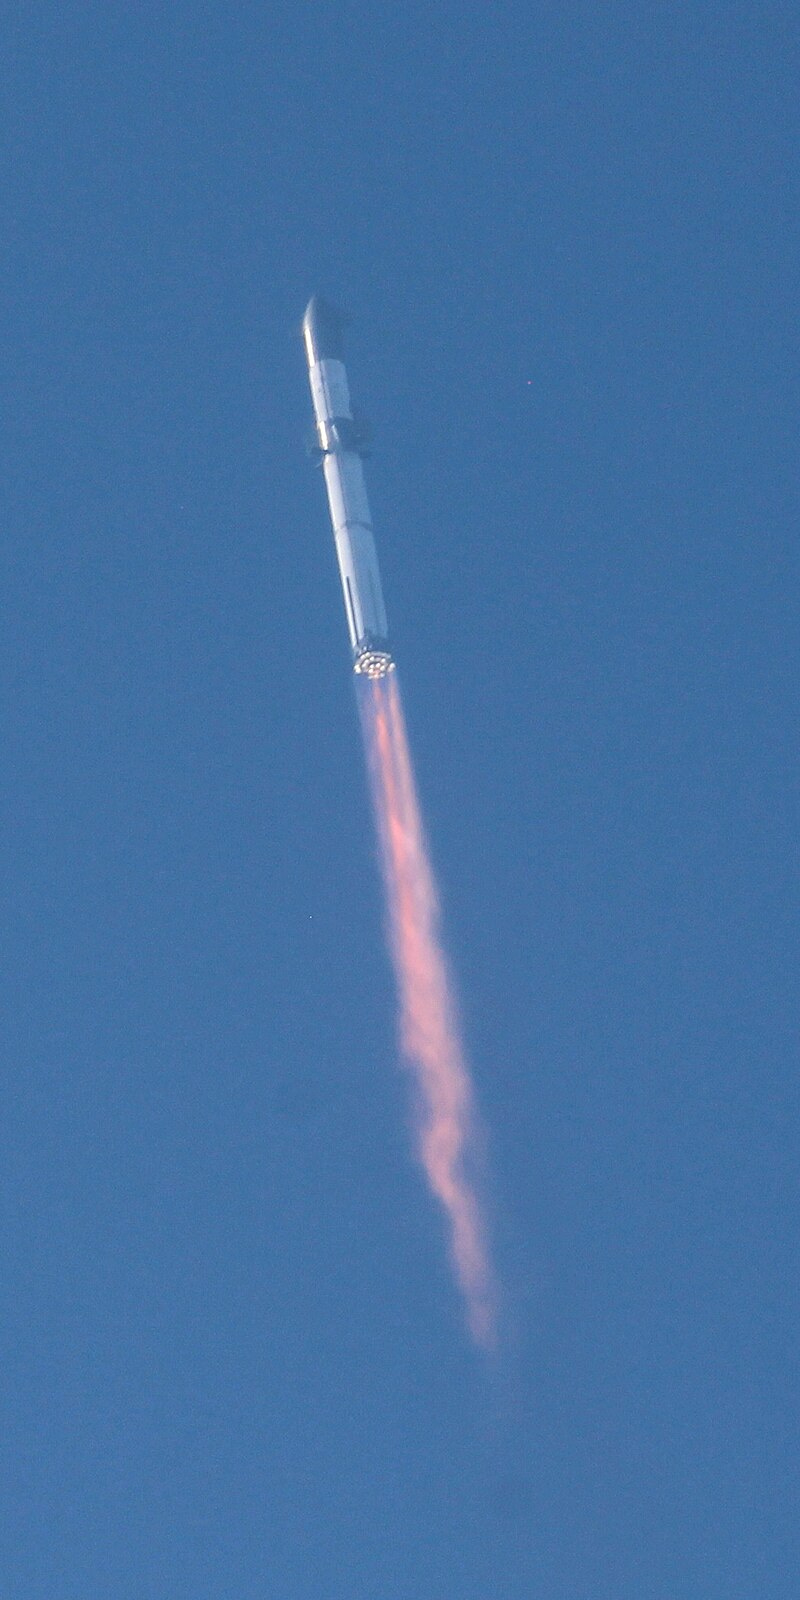 A photo of Starship launching against a blue sky. Flames trail from the rocket, but a handful of the 33 engines do not appear to be lit.